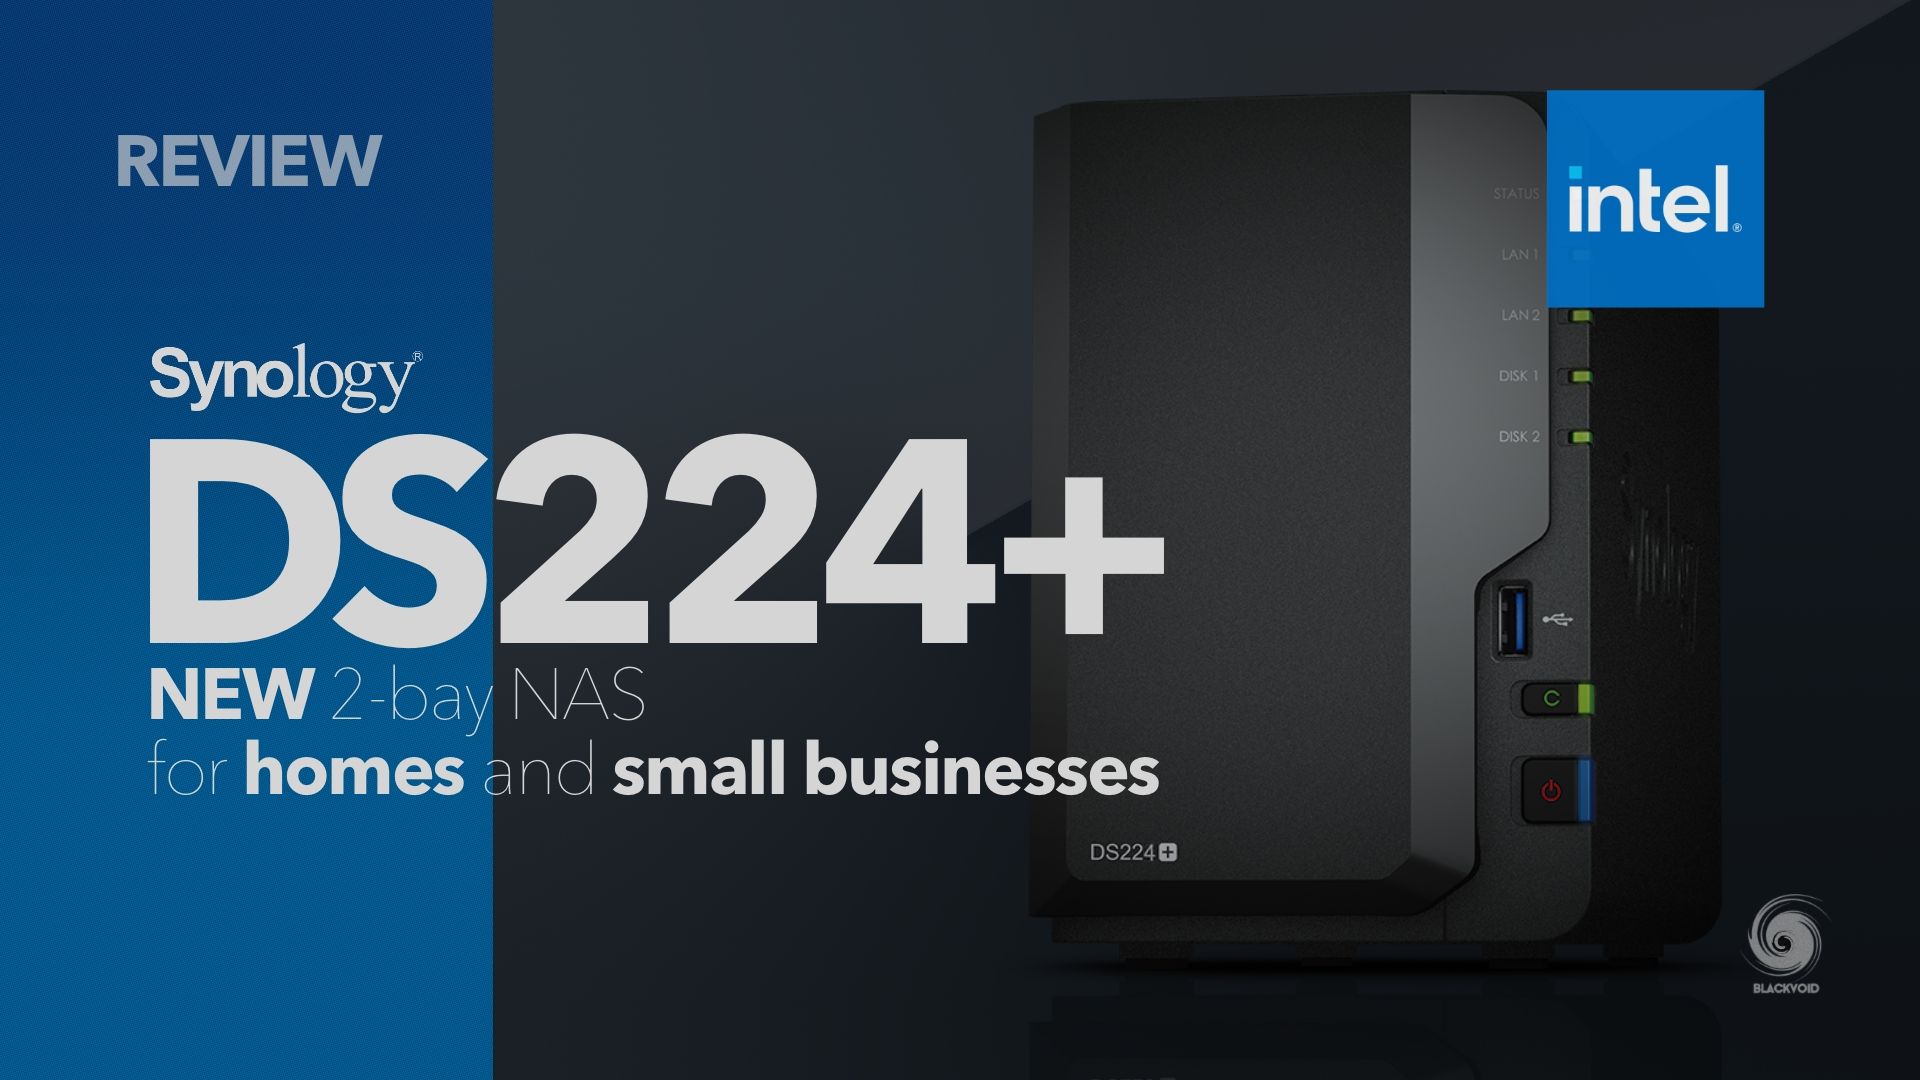 Synology DS224+ pregled